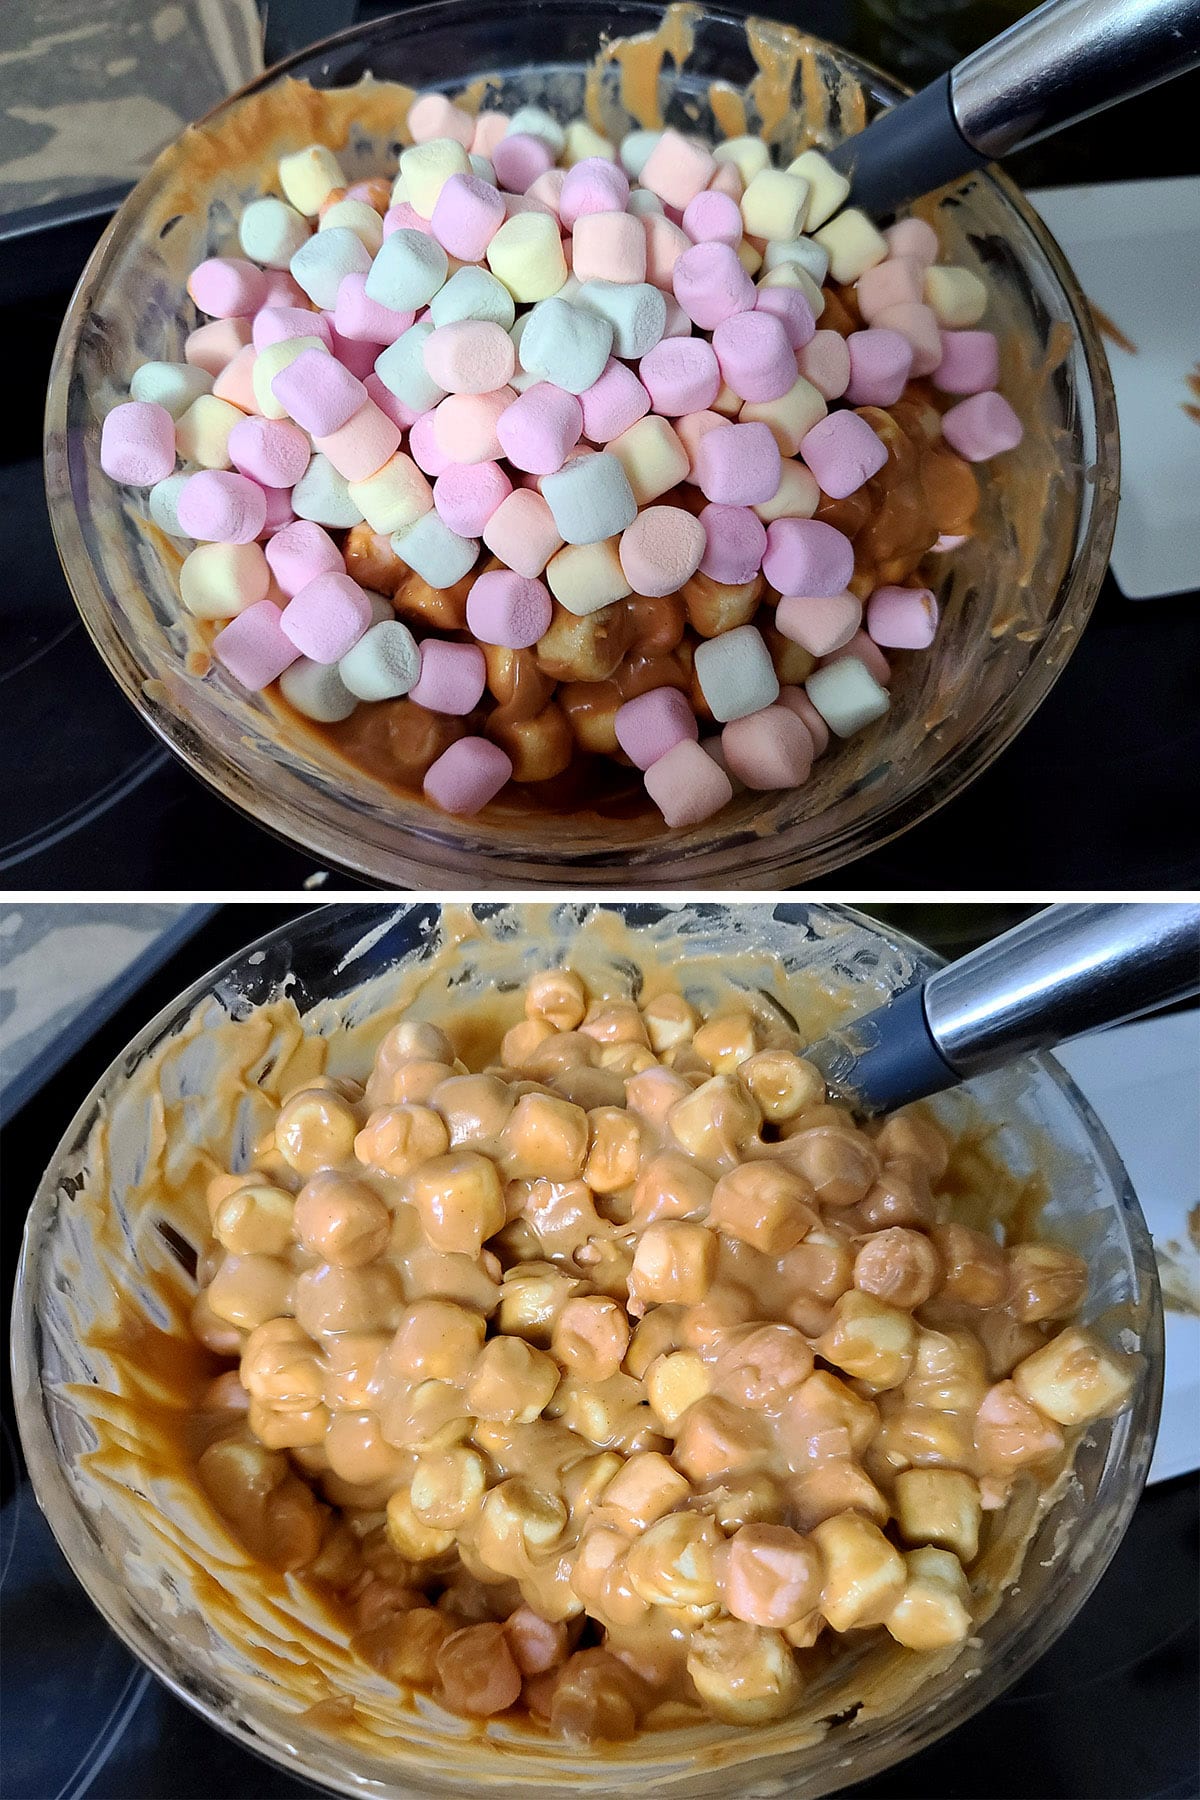 A 2 part image showing the marshmallows being stirred into the melted butterscotch mixture.